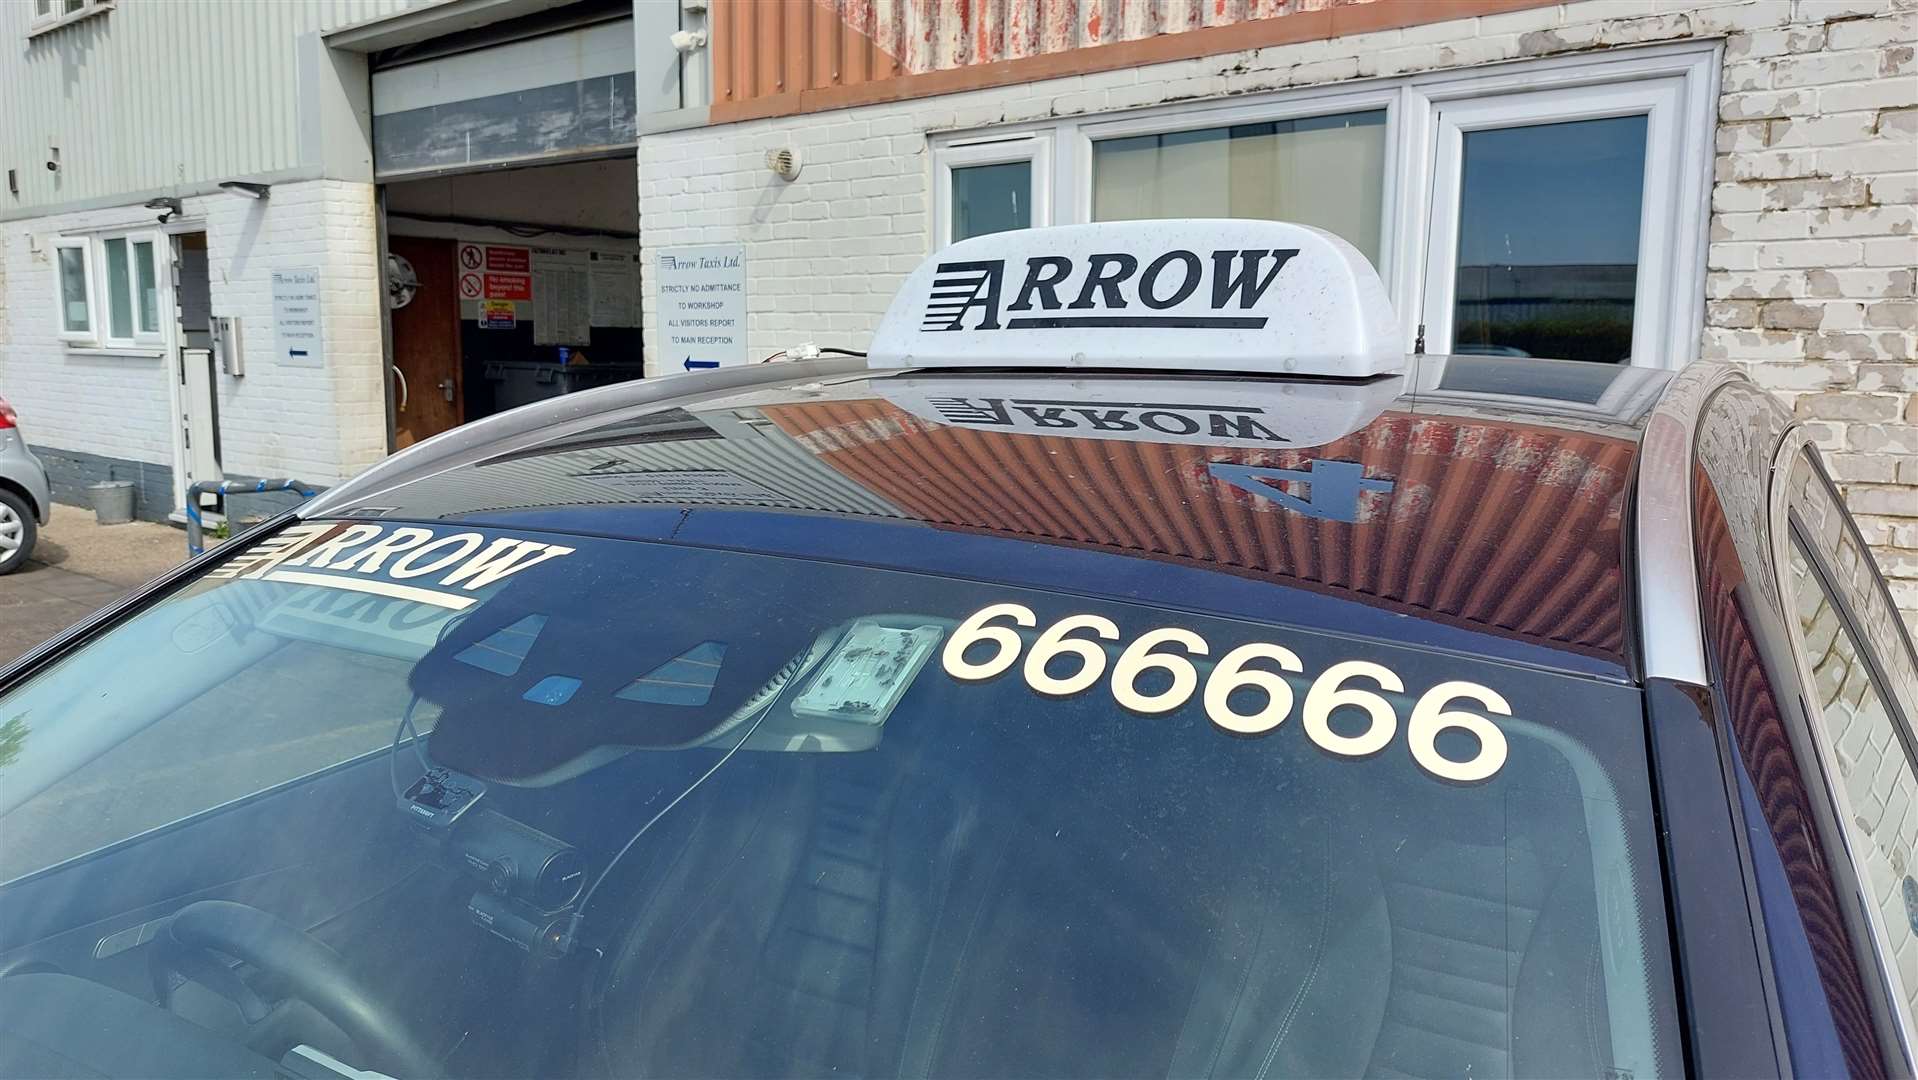 After 41 years in business, Arrow Taxis in Ashford has announced it will be closing next month after struggling to recover from the pandemic (57383907)